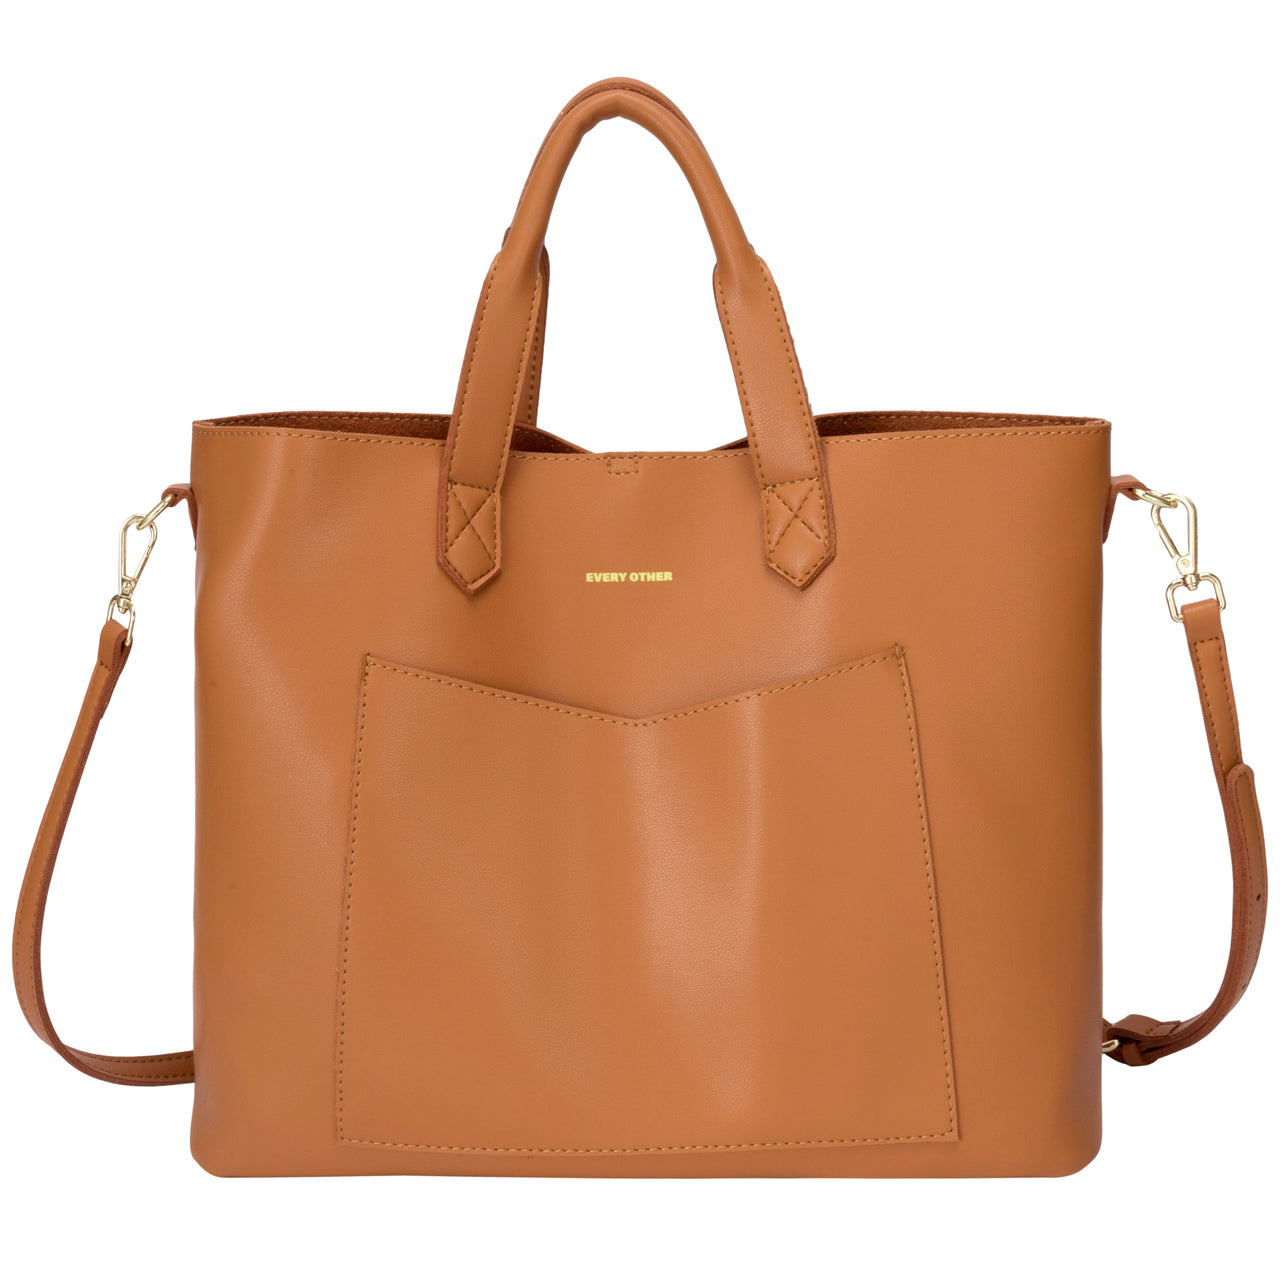 Every Other Twin Strap Twin Pocketed Tote Bag - Tan